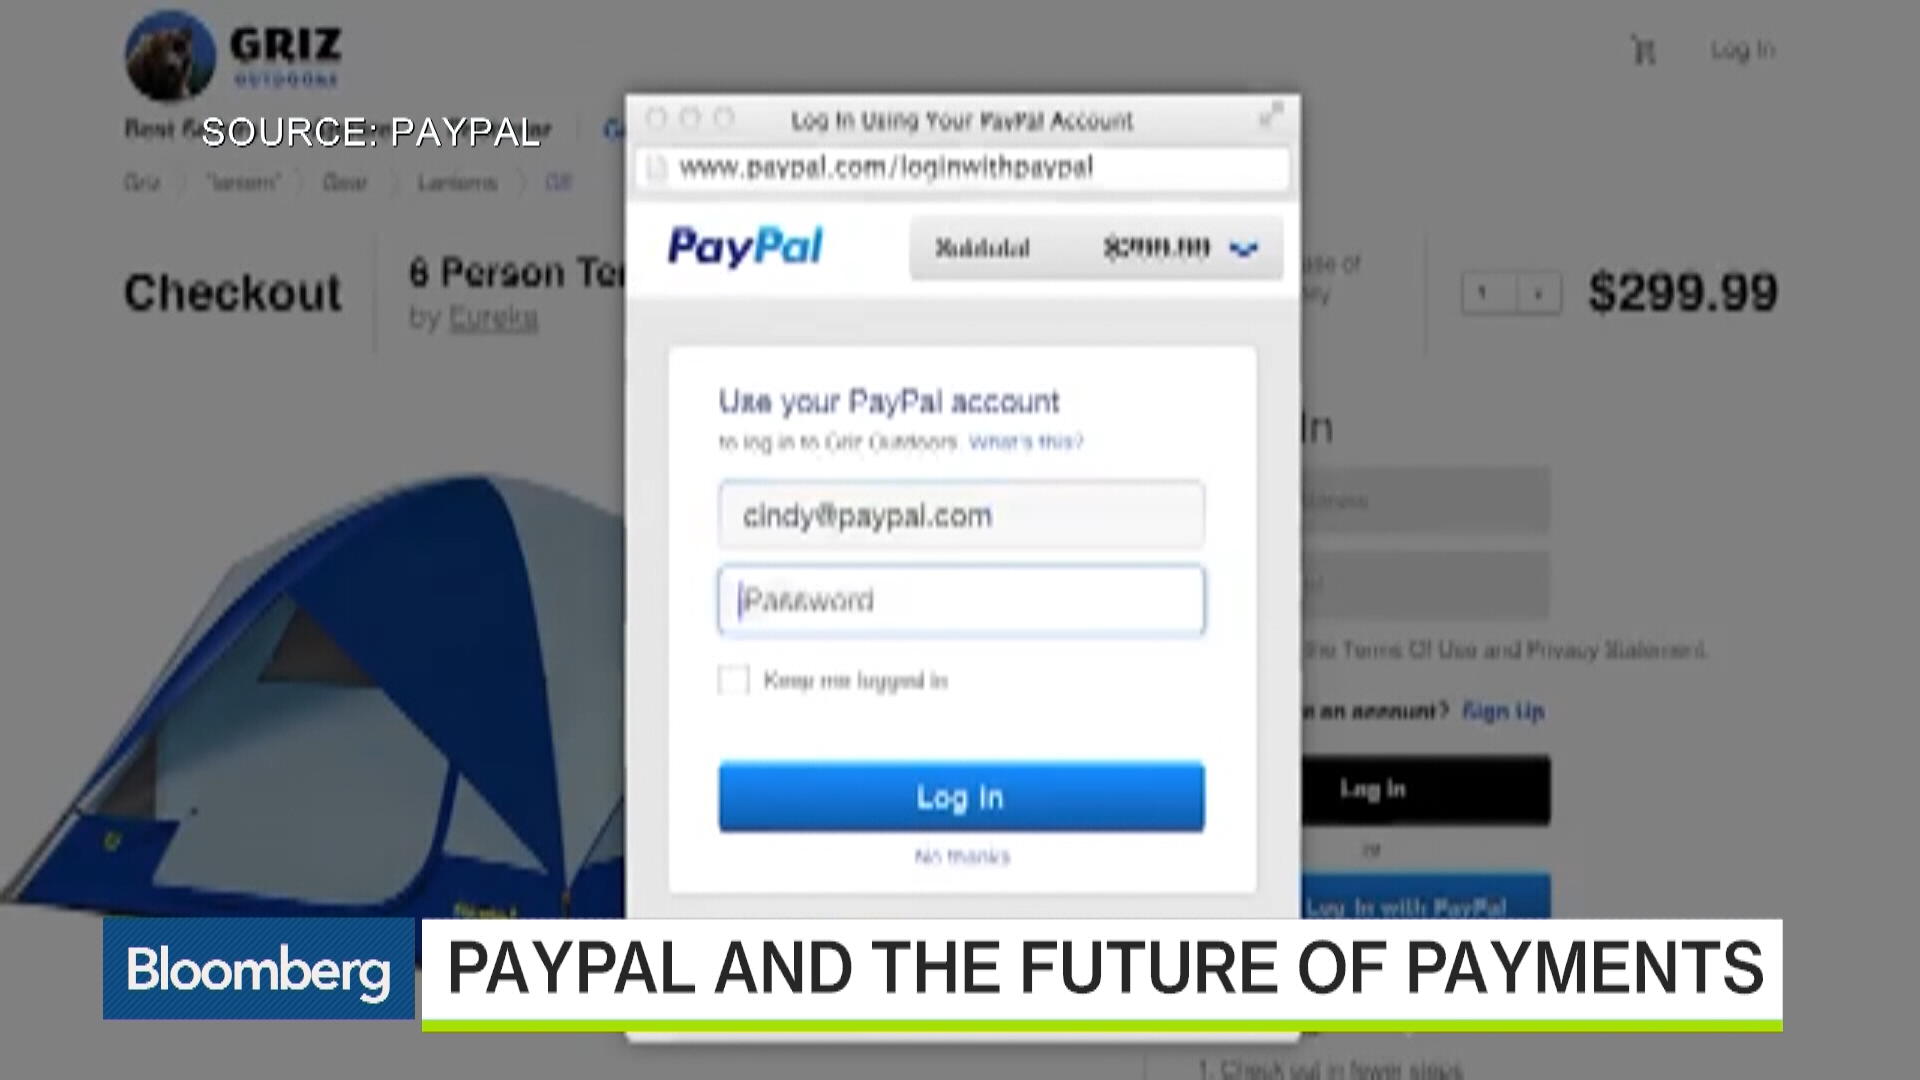 Who are PayPal's competitors?